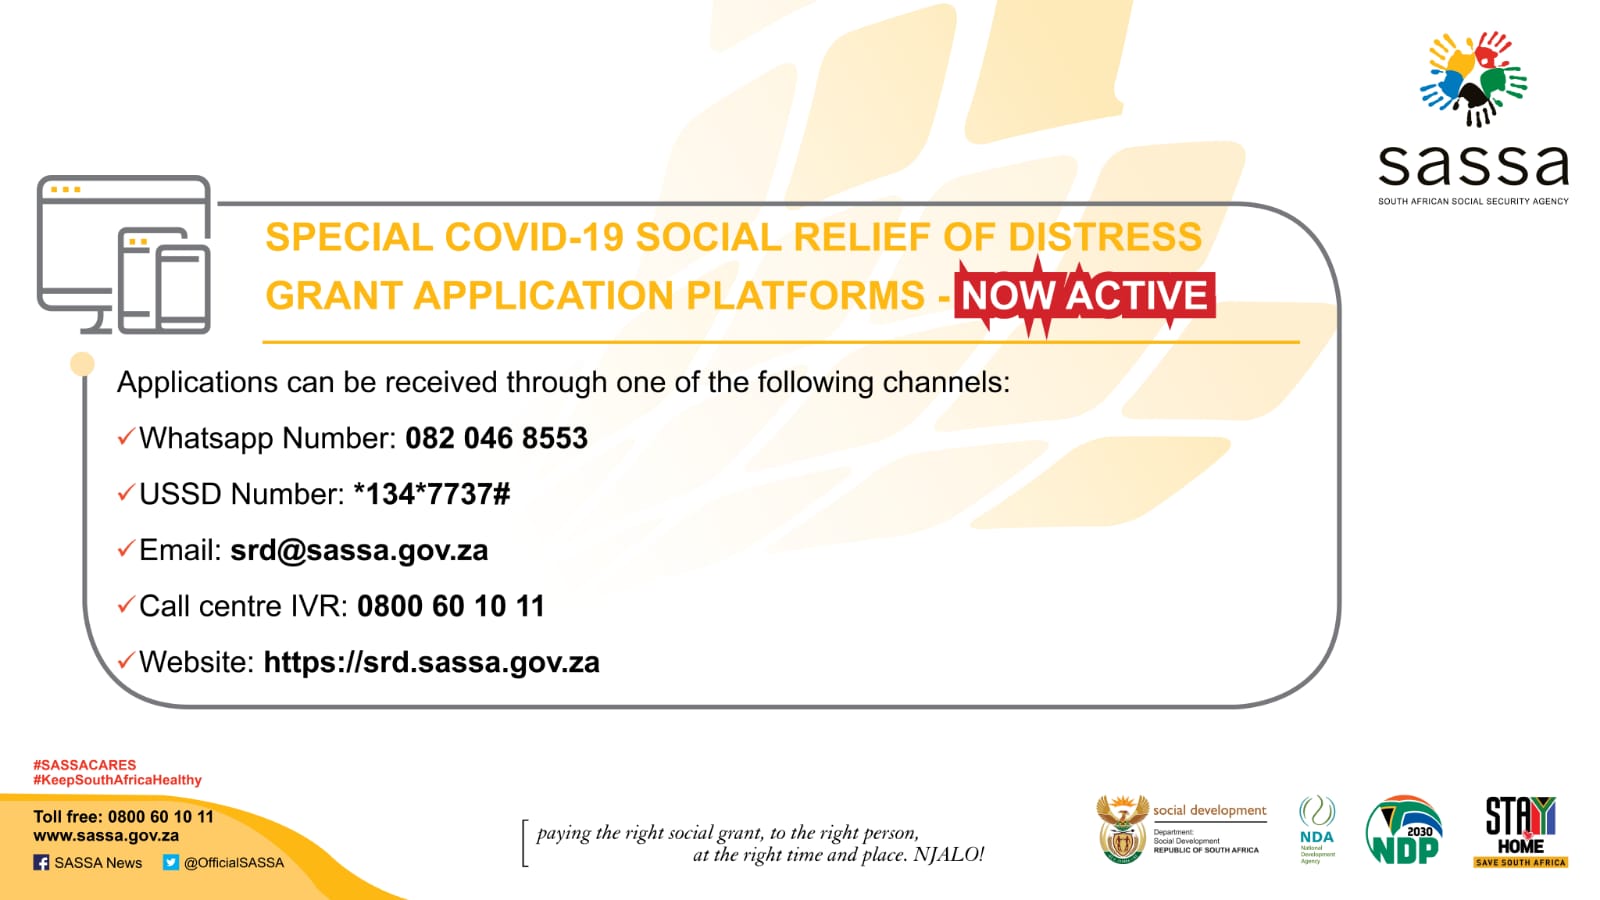 Who is eligible for a Social Relief of Distress (SRD) grant?